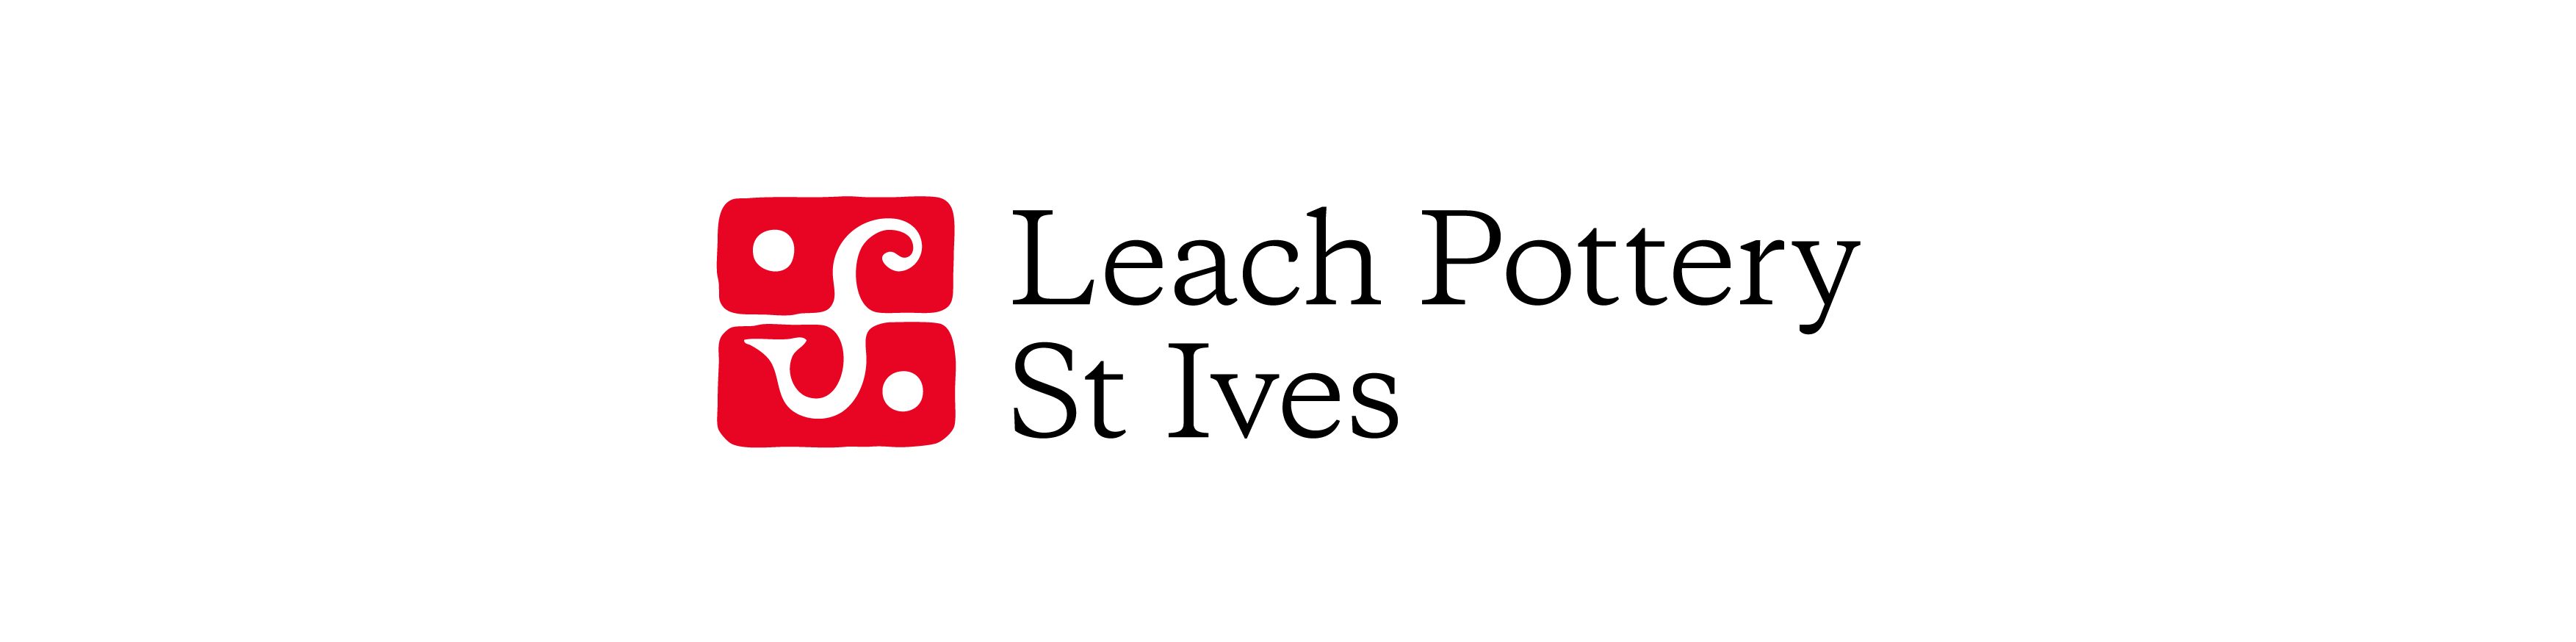 The latest news from Leach Pottery